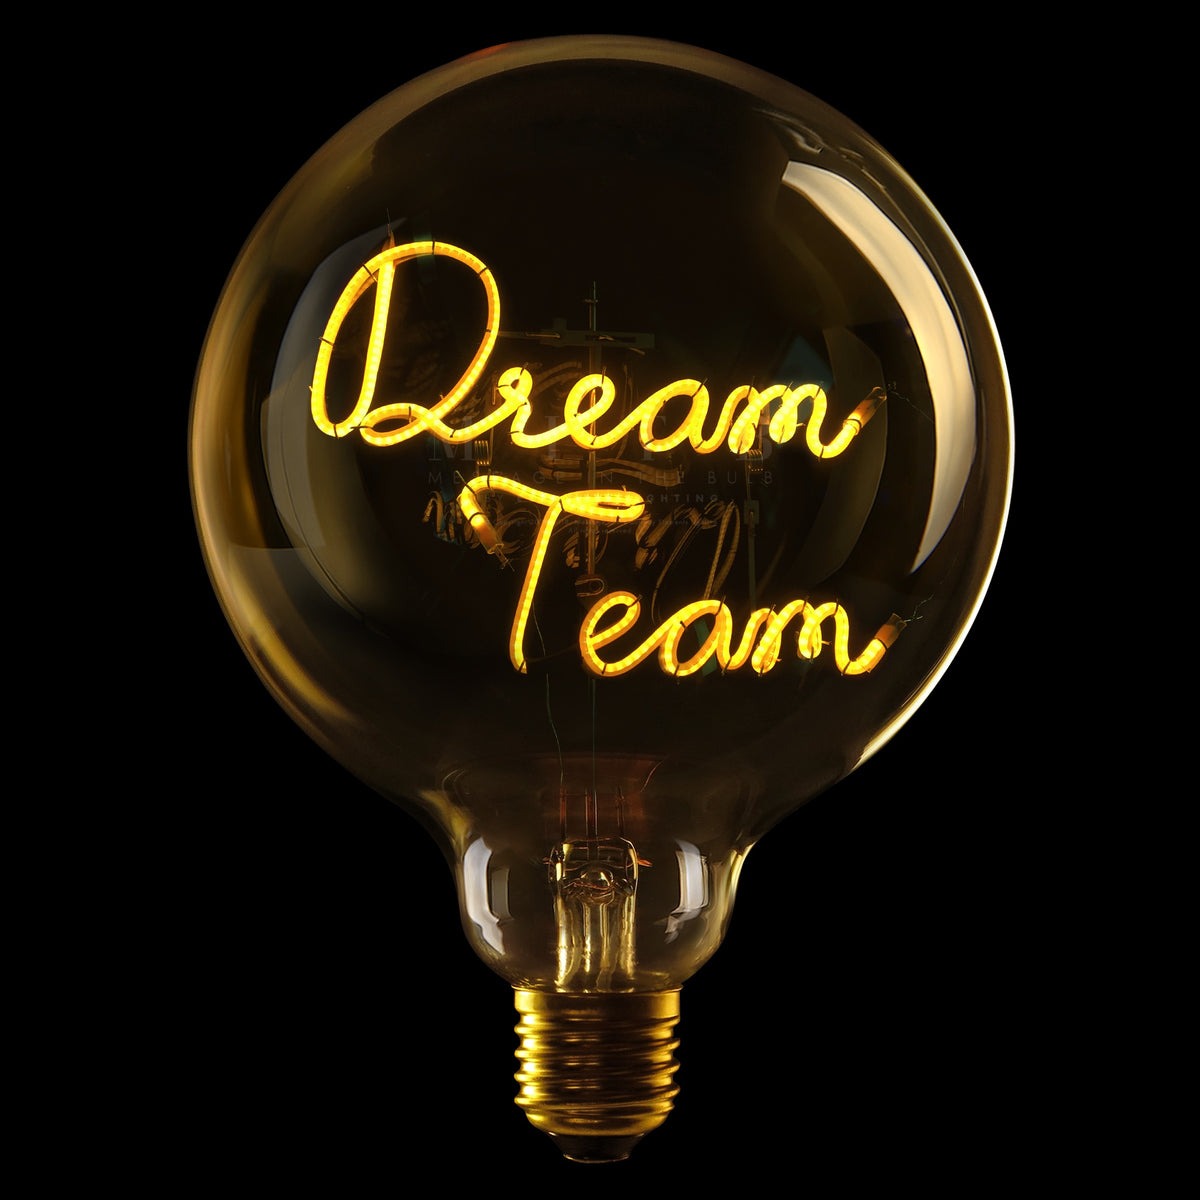 MESSAGE IN THE BULB - DREAM TEAM